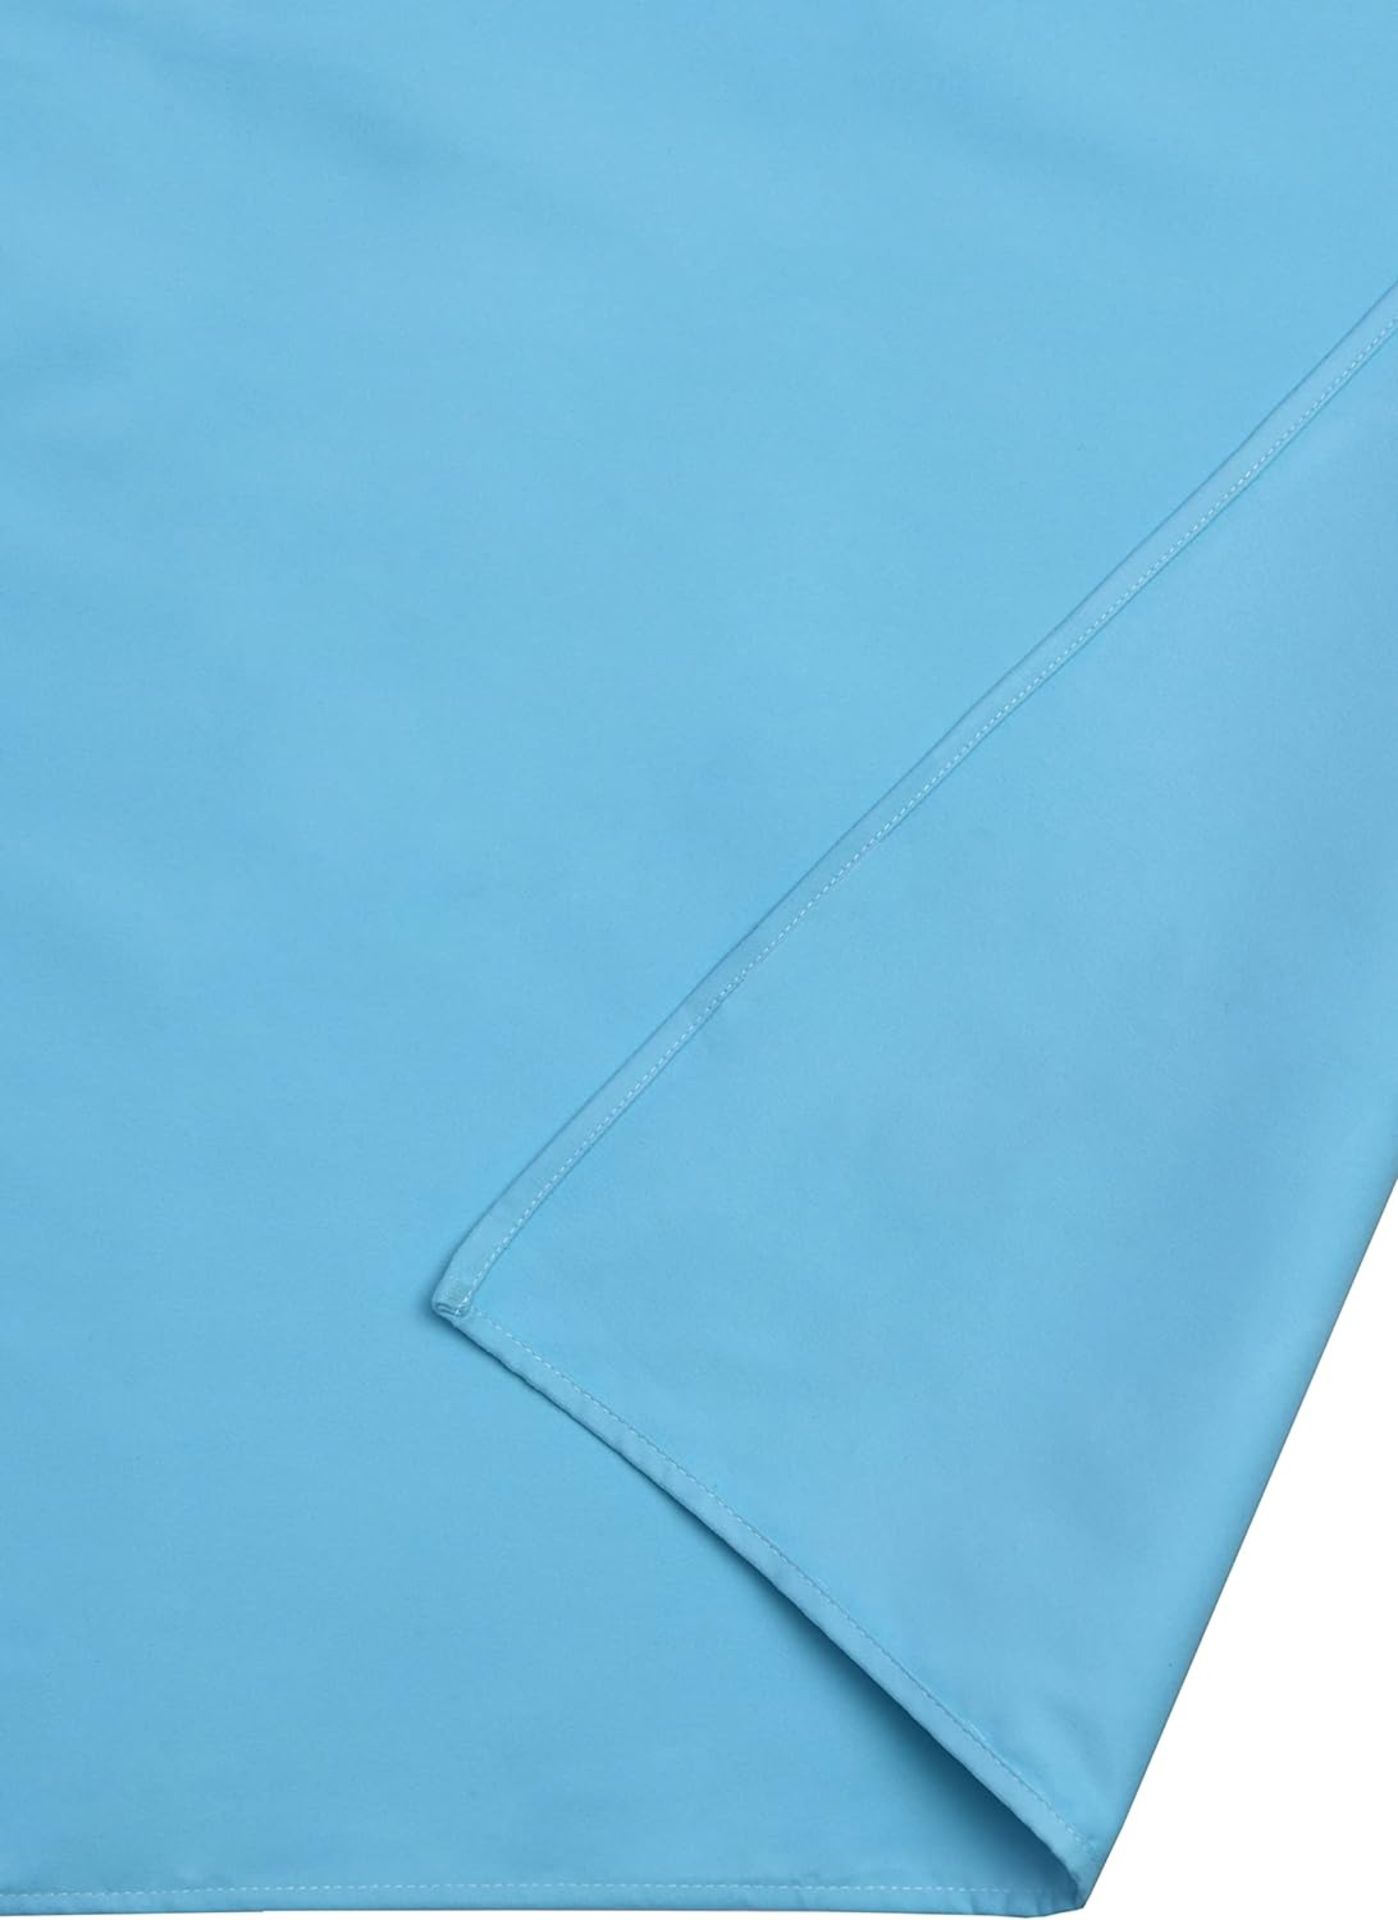 11x NEW & PACKAGED SLEEPDOWN Quick Dry Beach Towel 90 x 160cm With Carry Pouch - AQUA. RRP £21.99 - Image 3 of 3